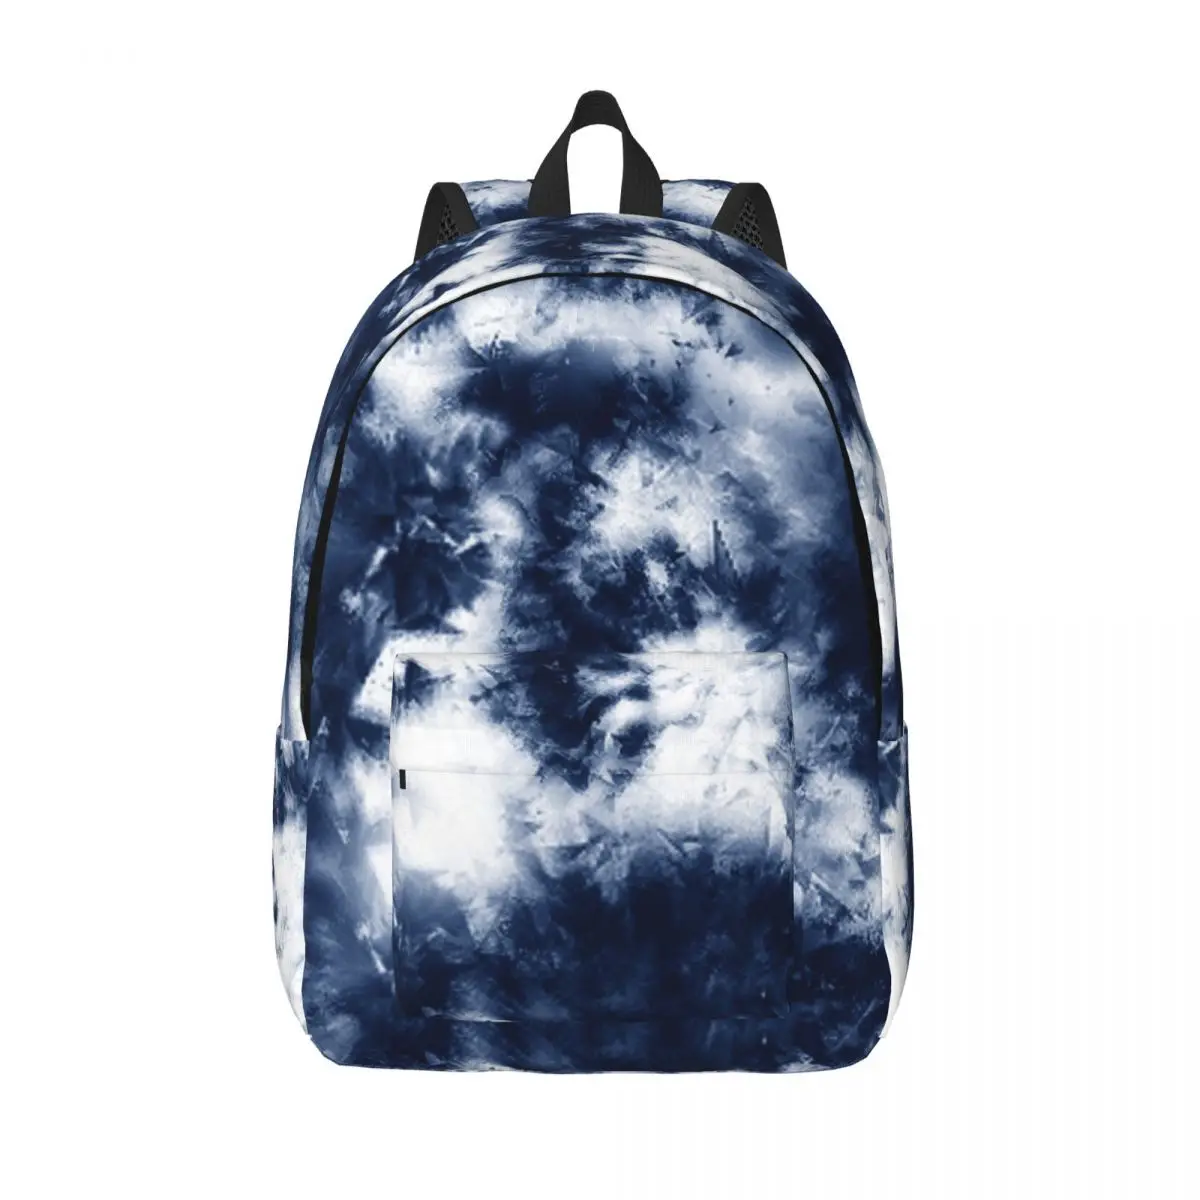 

Blue Tie Dye Pattern Teenage Backpack Sports Student Hiking Travel Daypack for Men Women Laptop Canvas Bags